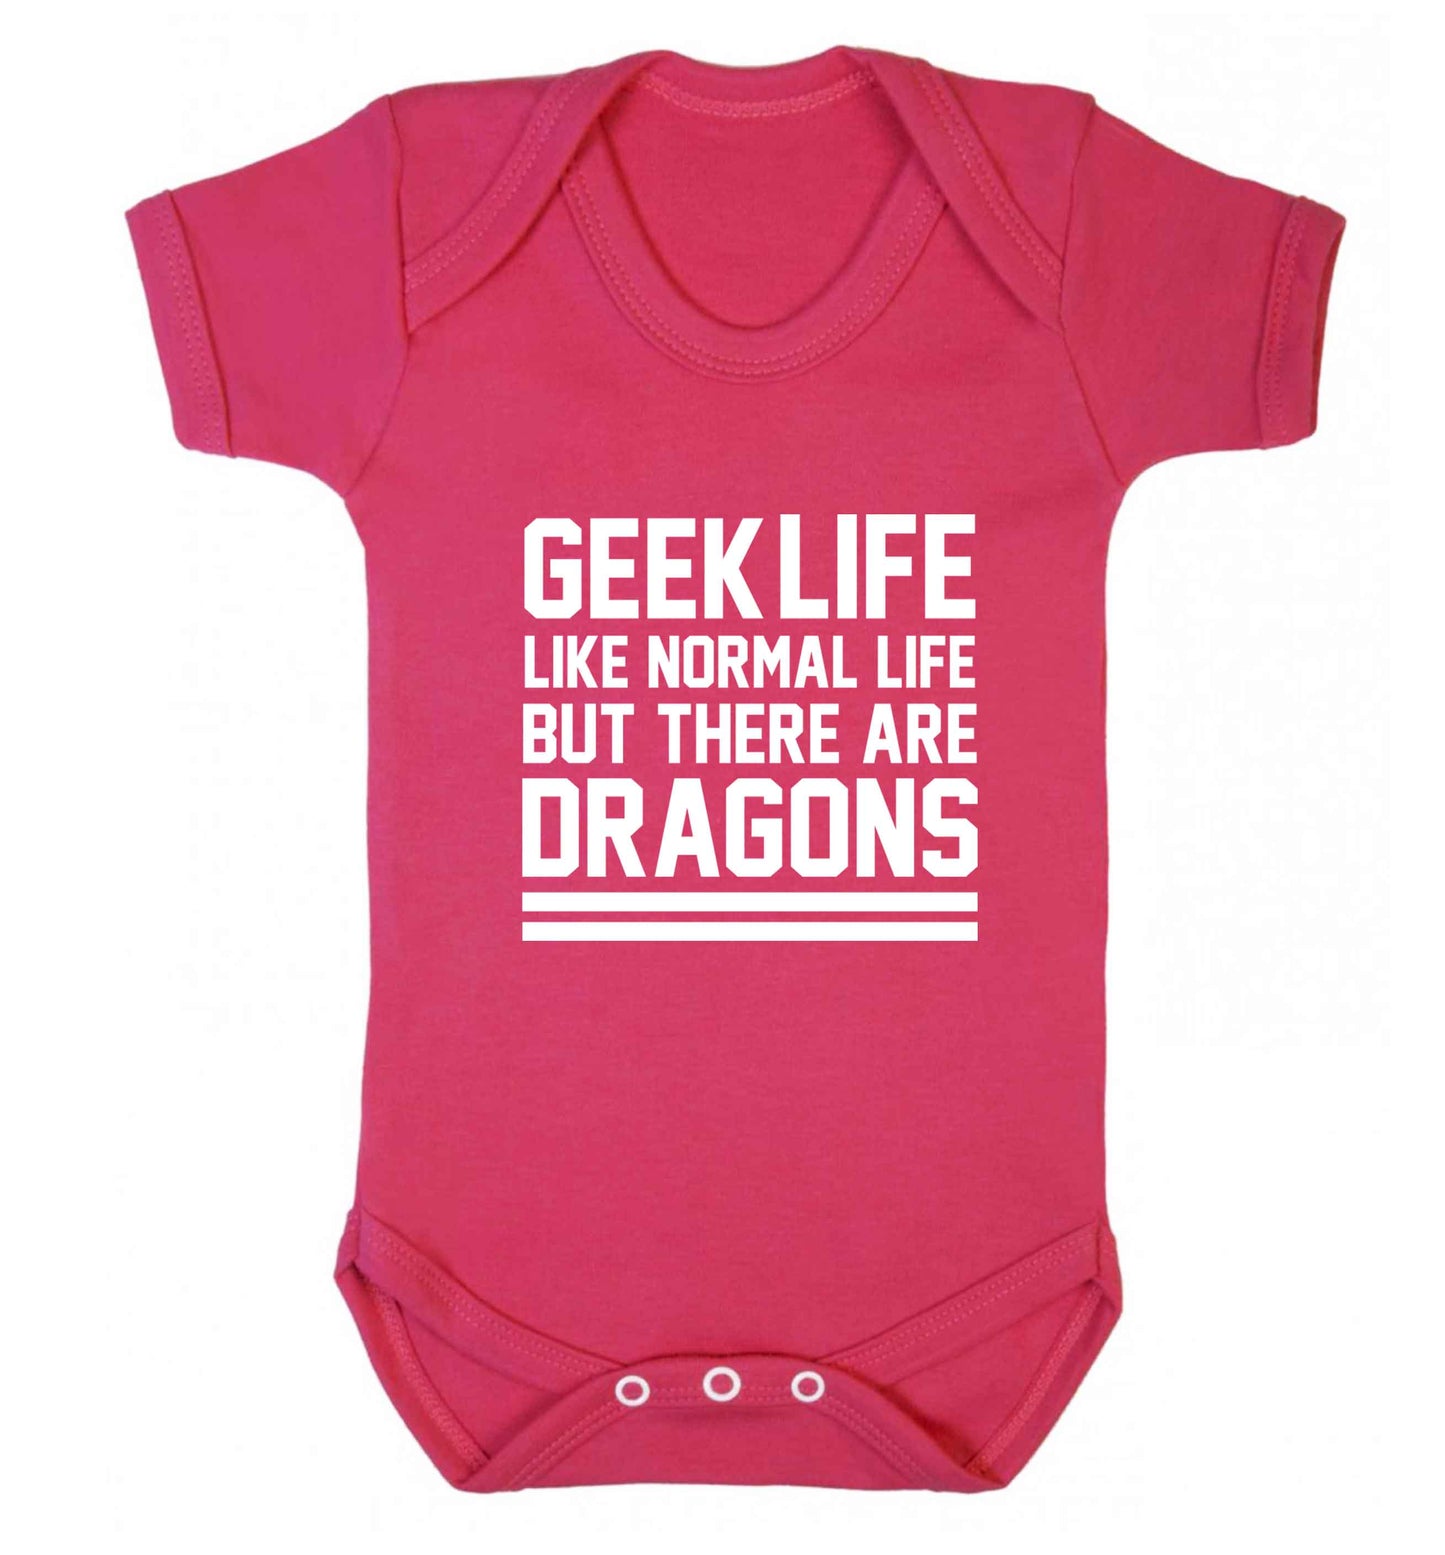 Geek life like normal life but there are dragons baby vest dark pink 18-24 months